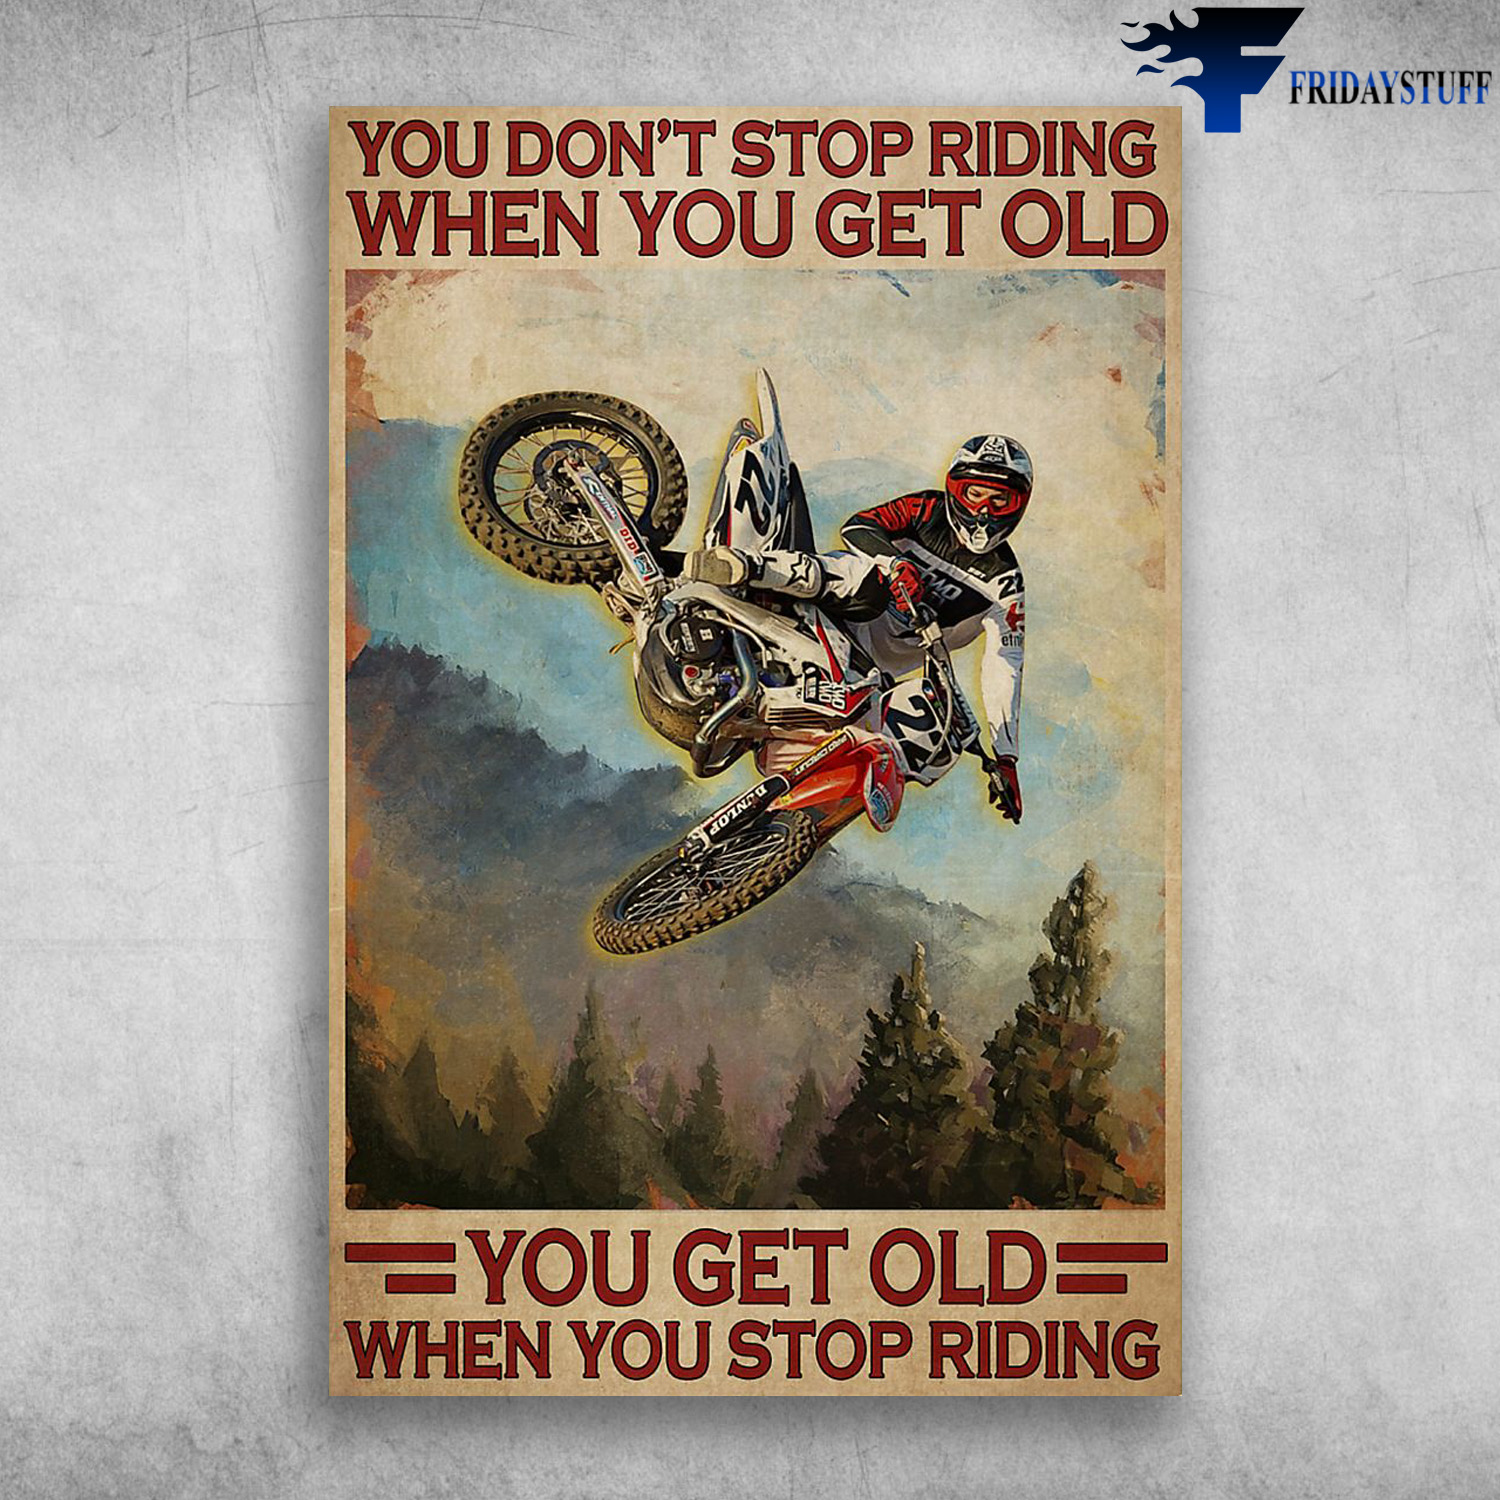 Motorcycle Racer Rerforming In The Air - You Don't Stop Riding When You Get Old